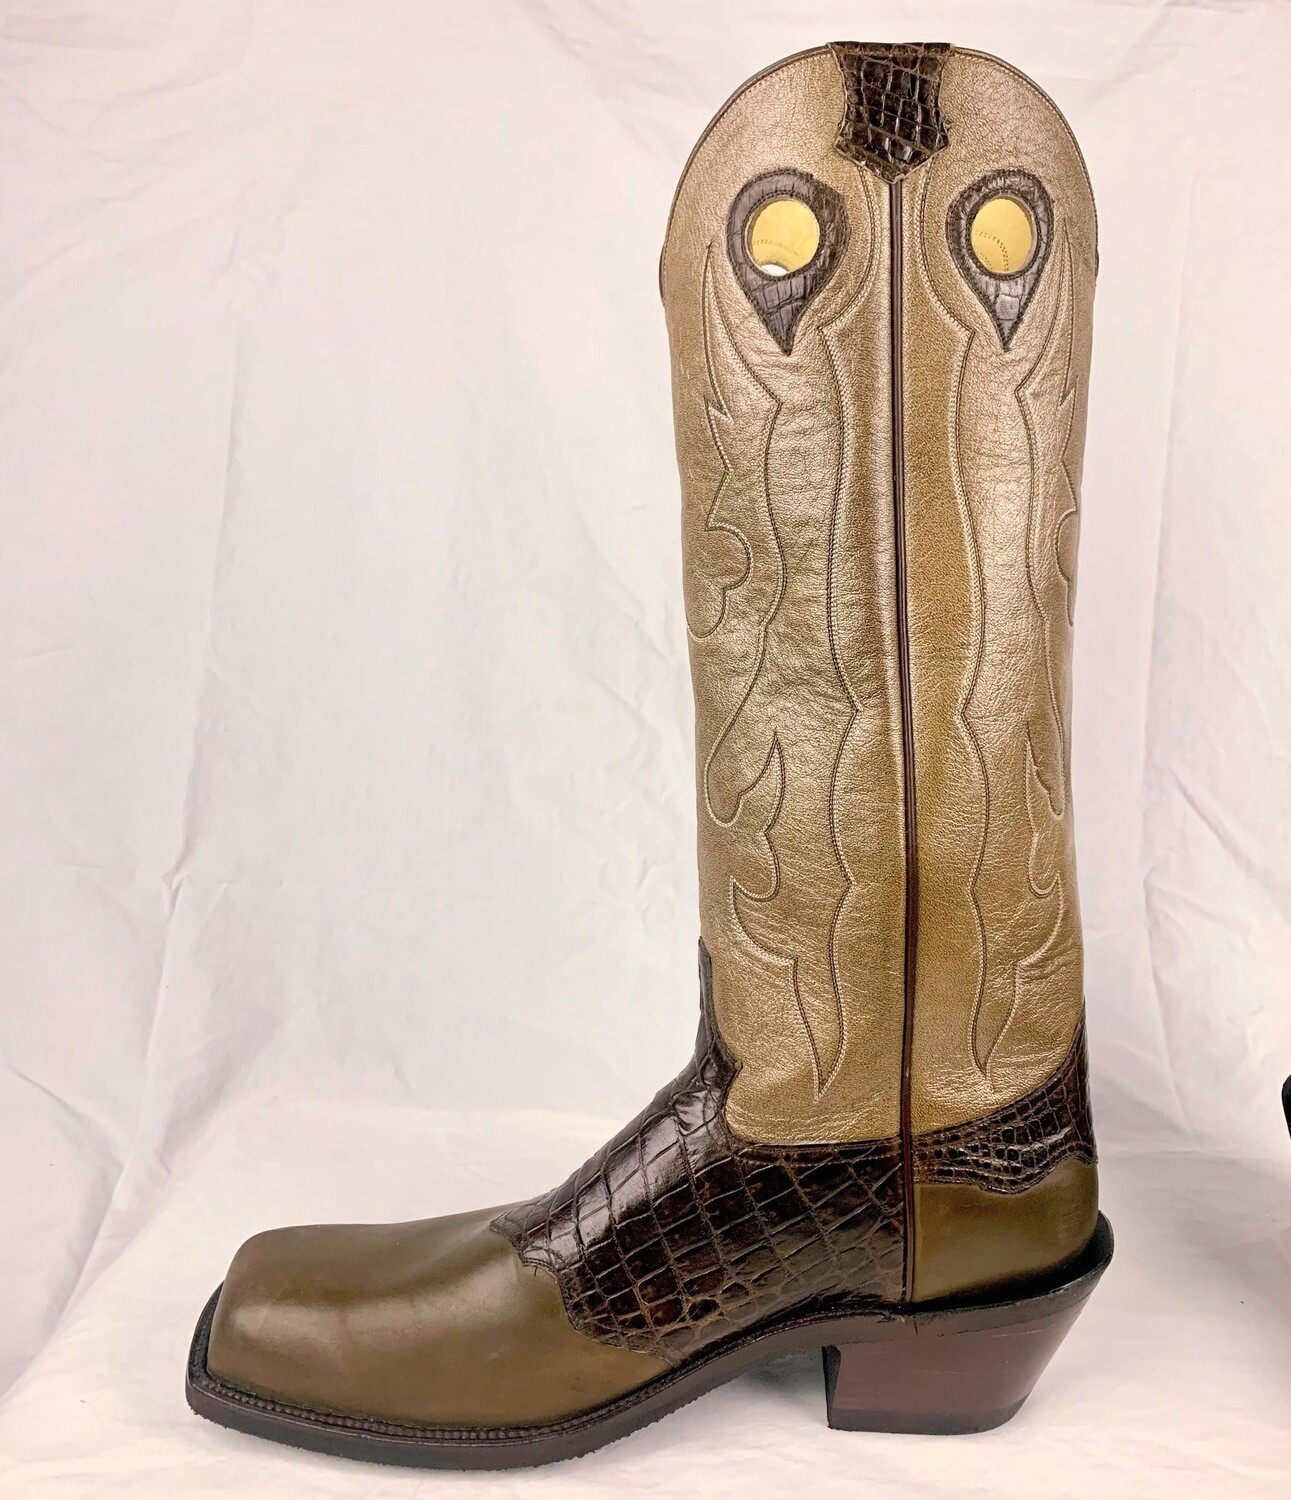 The Lewis Riding Cowboy Boots